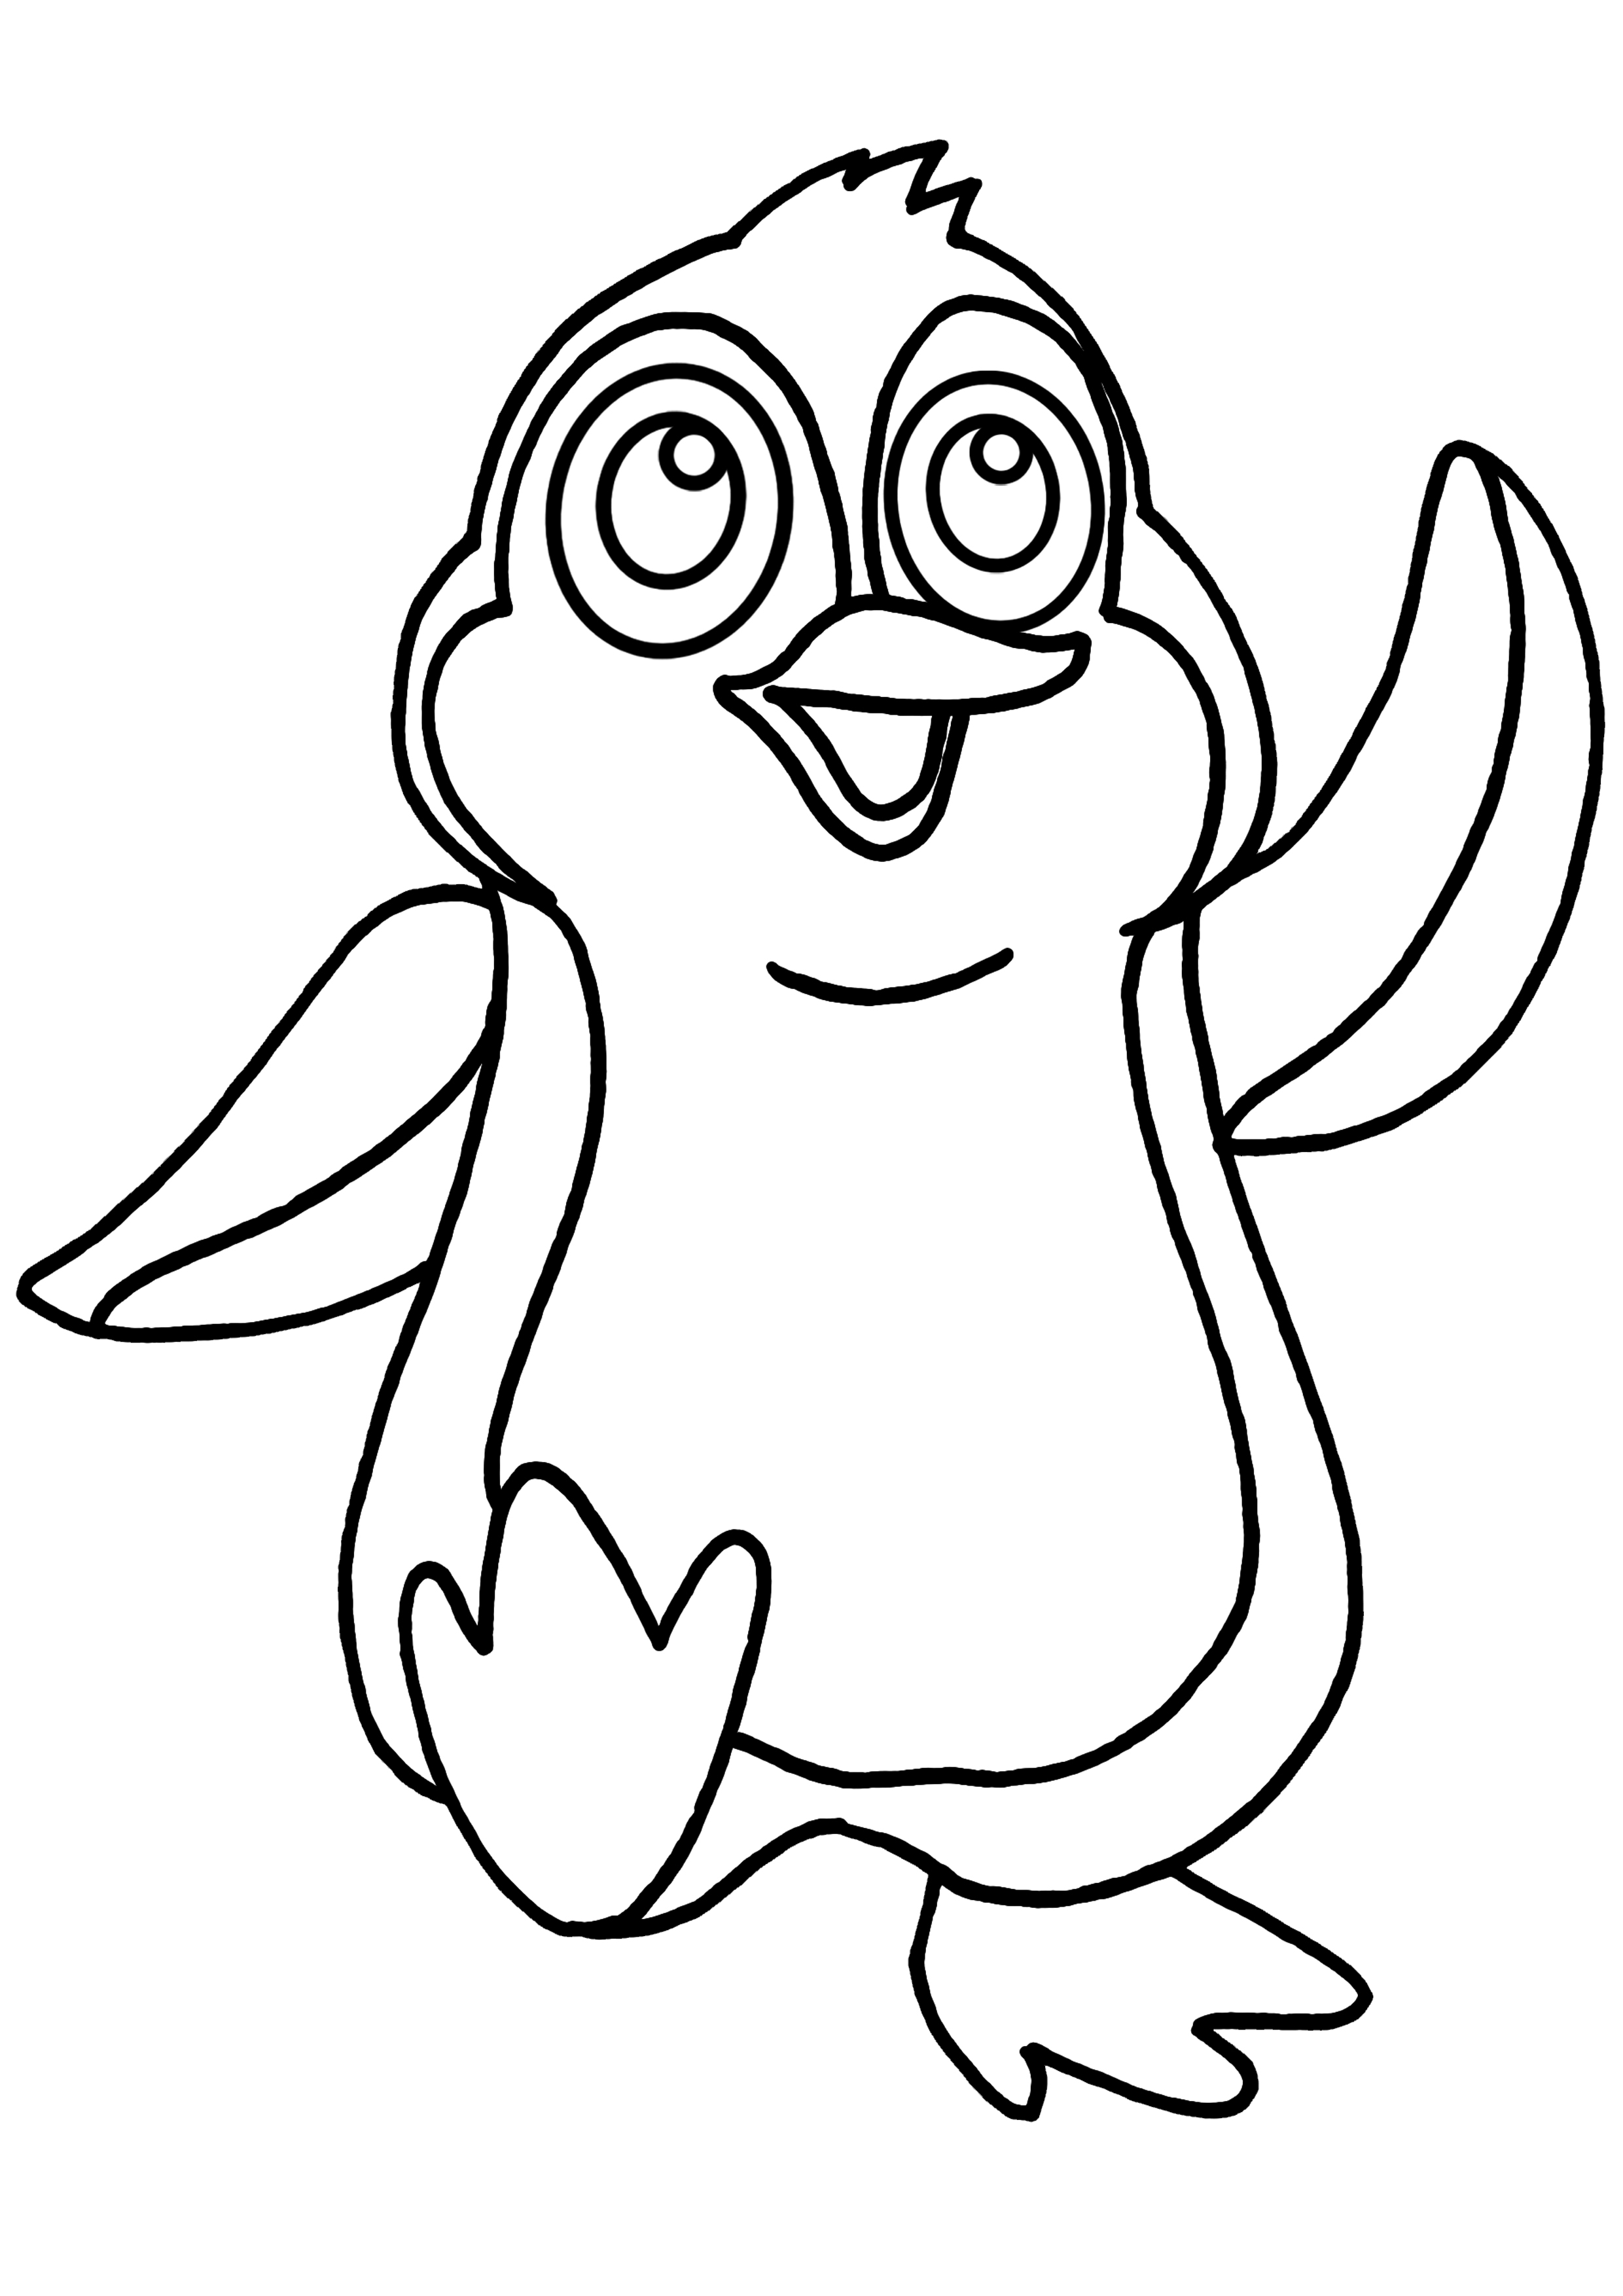 Penguin #16904 (Animals) Free Printable Coloring Pages